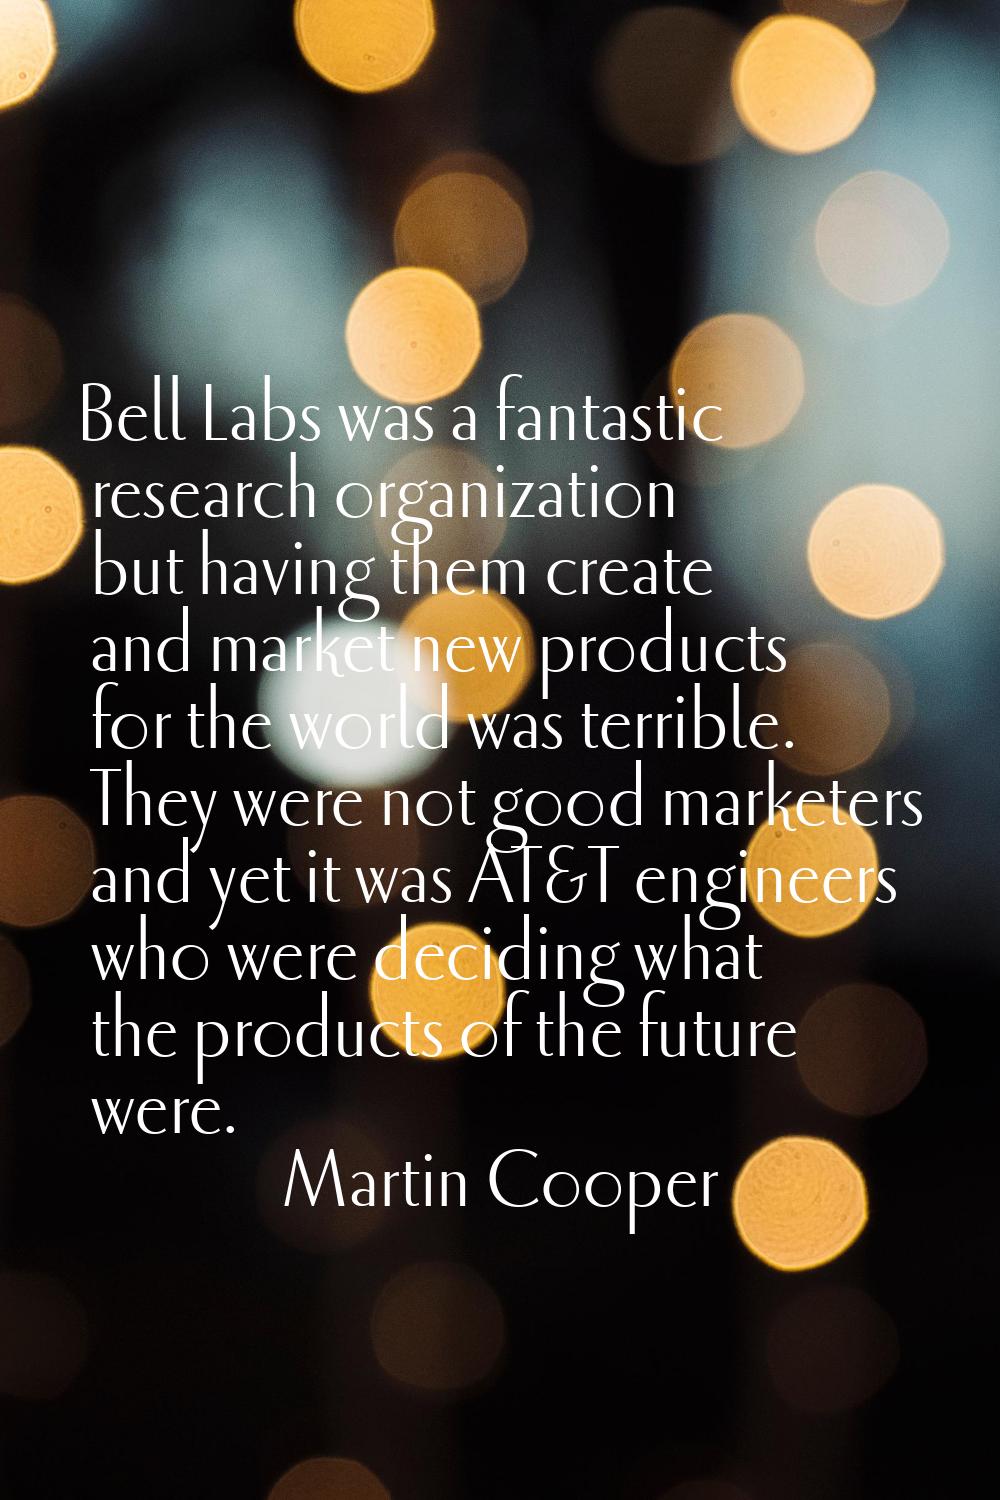 Bell Labs was a fantastic research organization but having them create and market new products for 